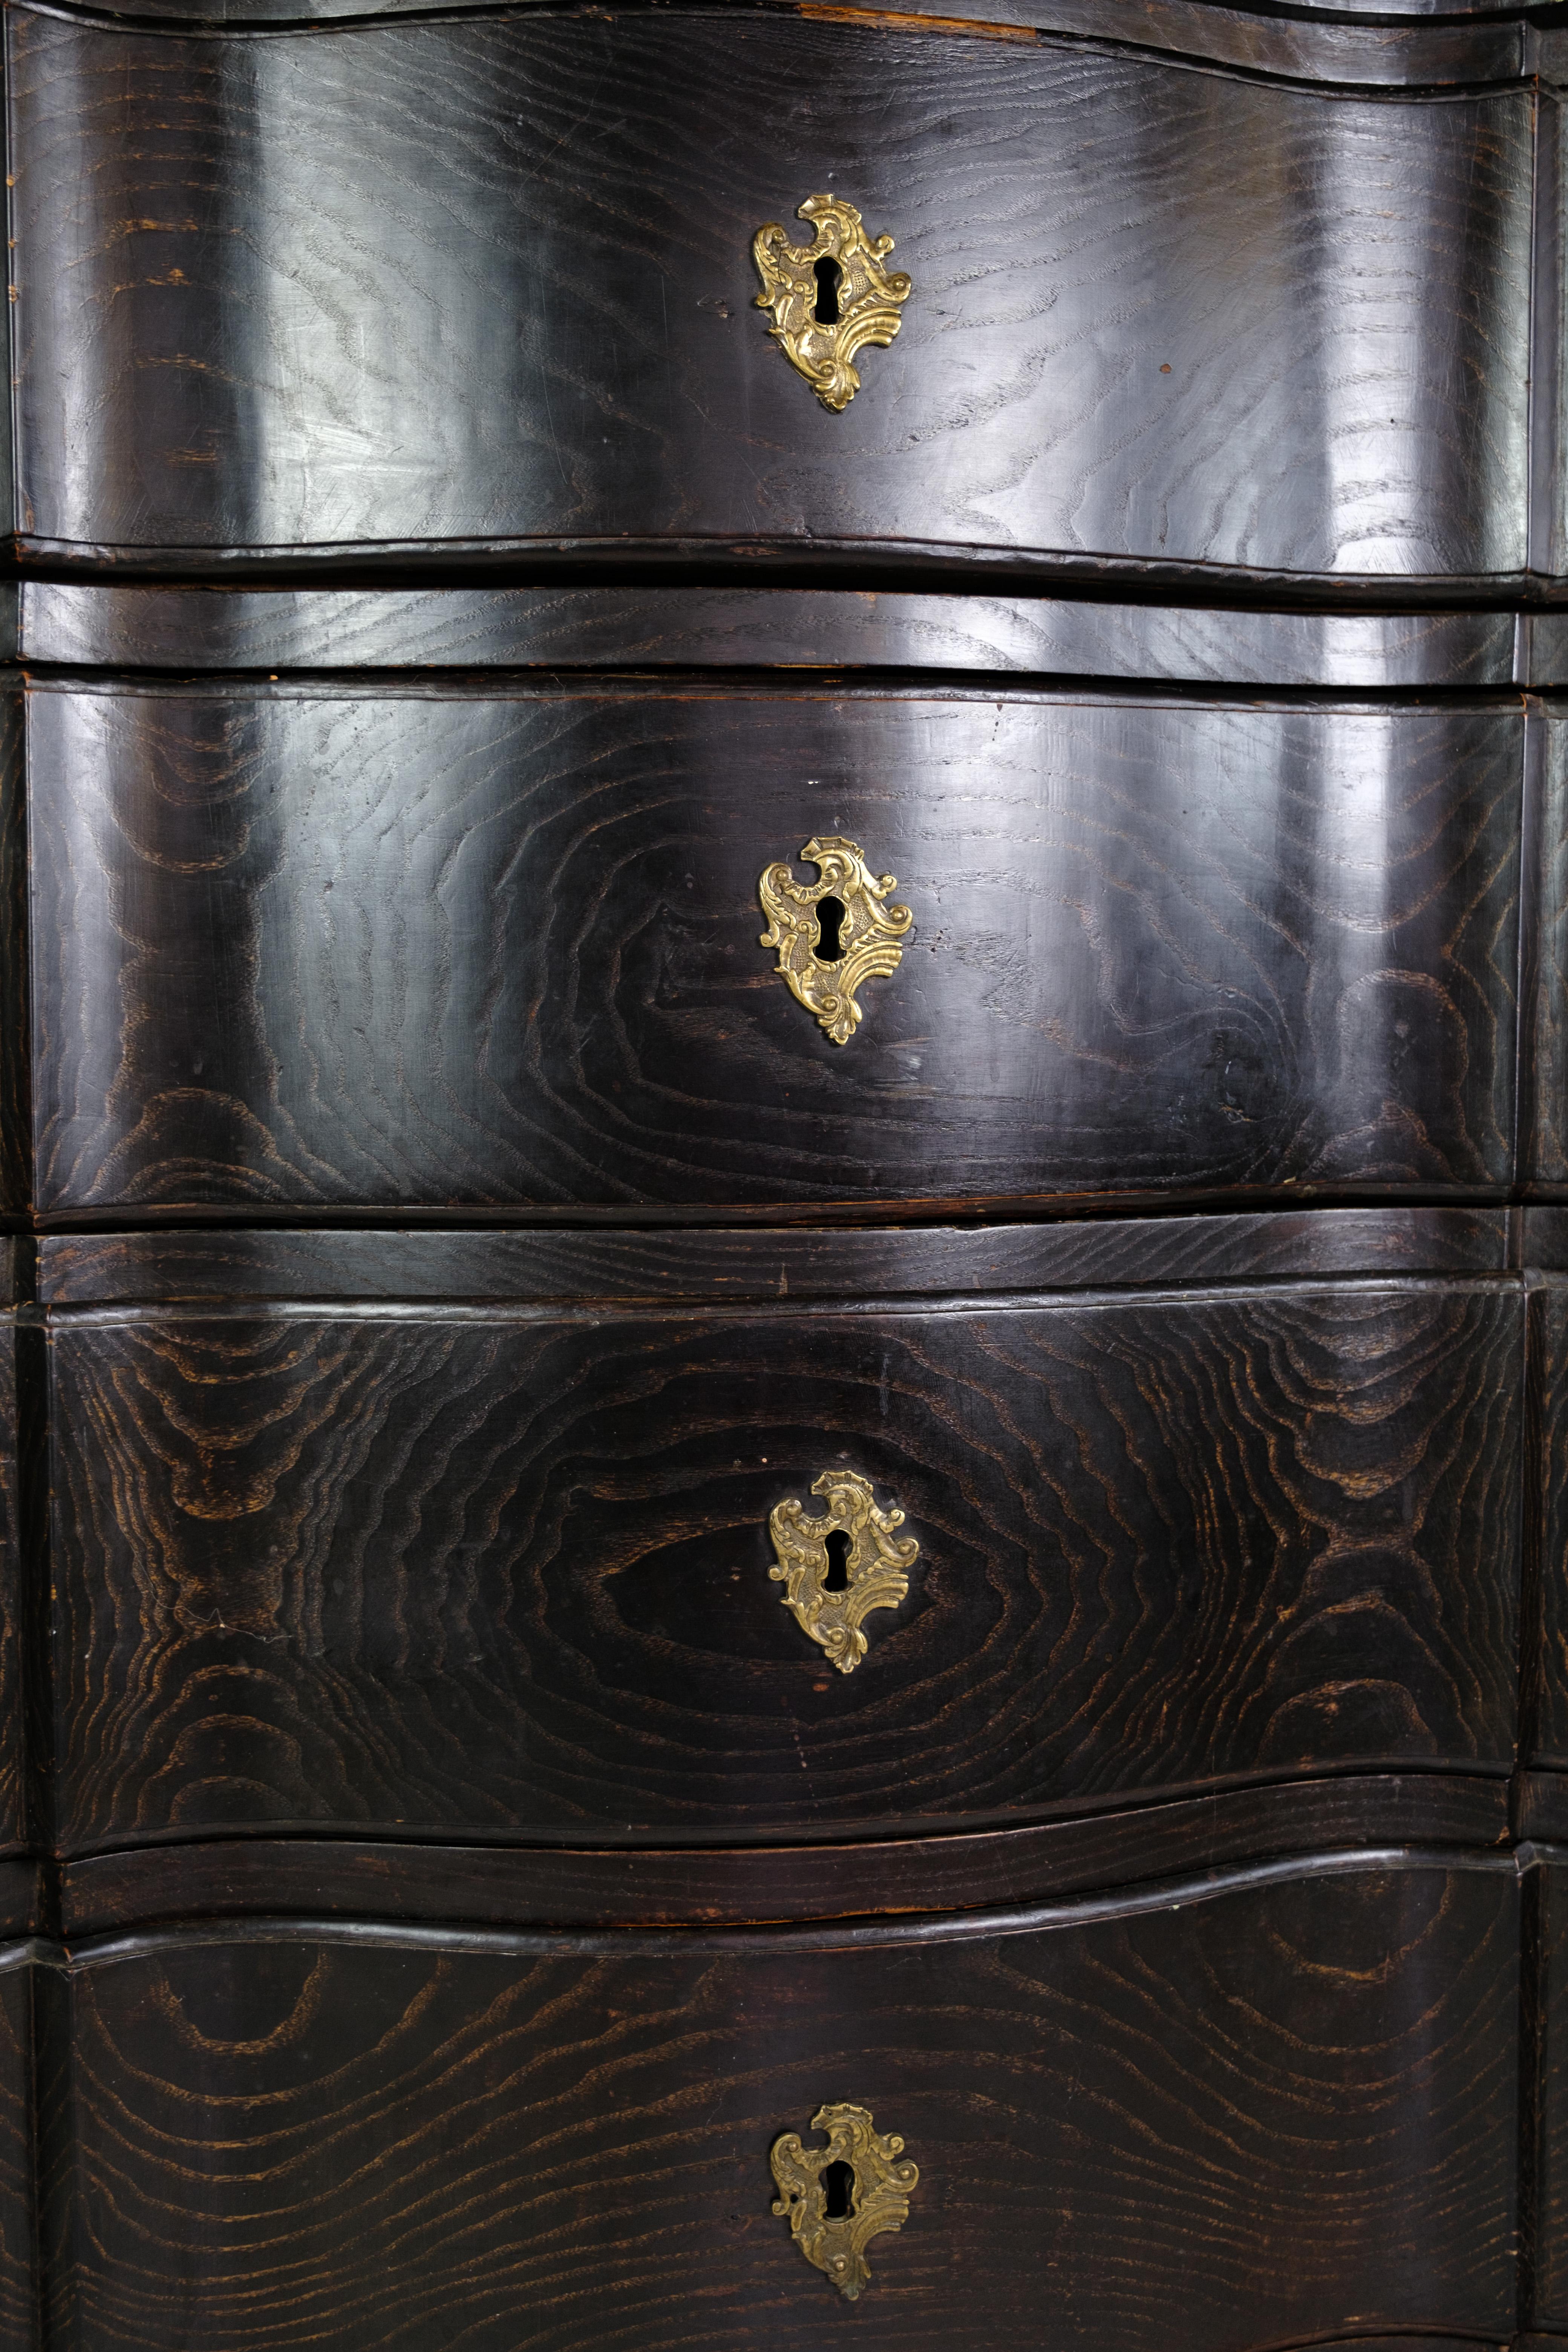 Chest of drawers in stained oak with brass fittings decorated with wood carvings from the period around the 19th century. Has a total of 4 drawers and key included.
Dimensions in cm: H:111 W:120 D:60